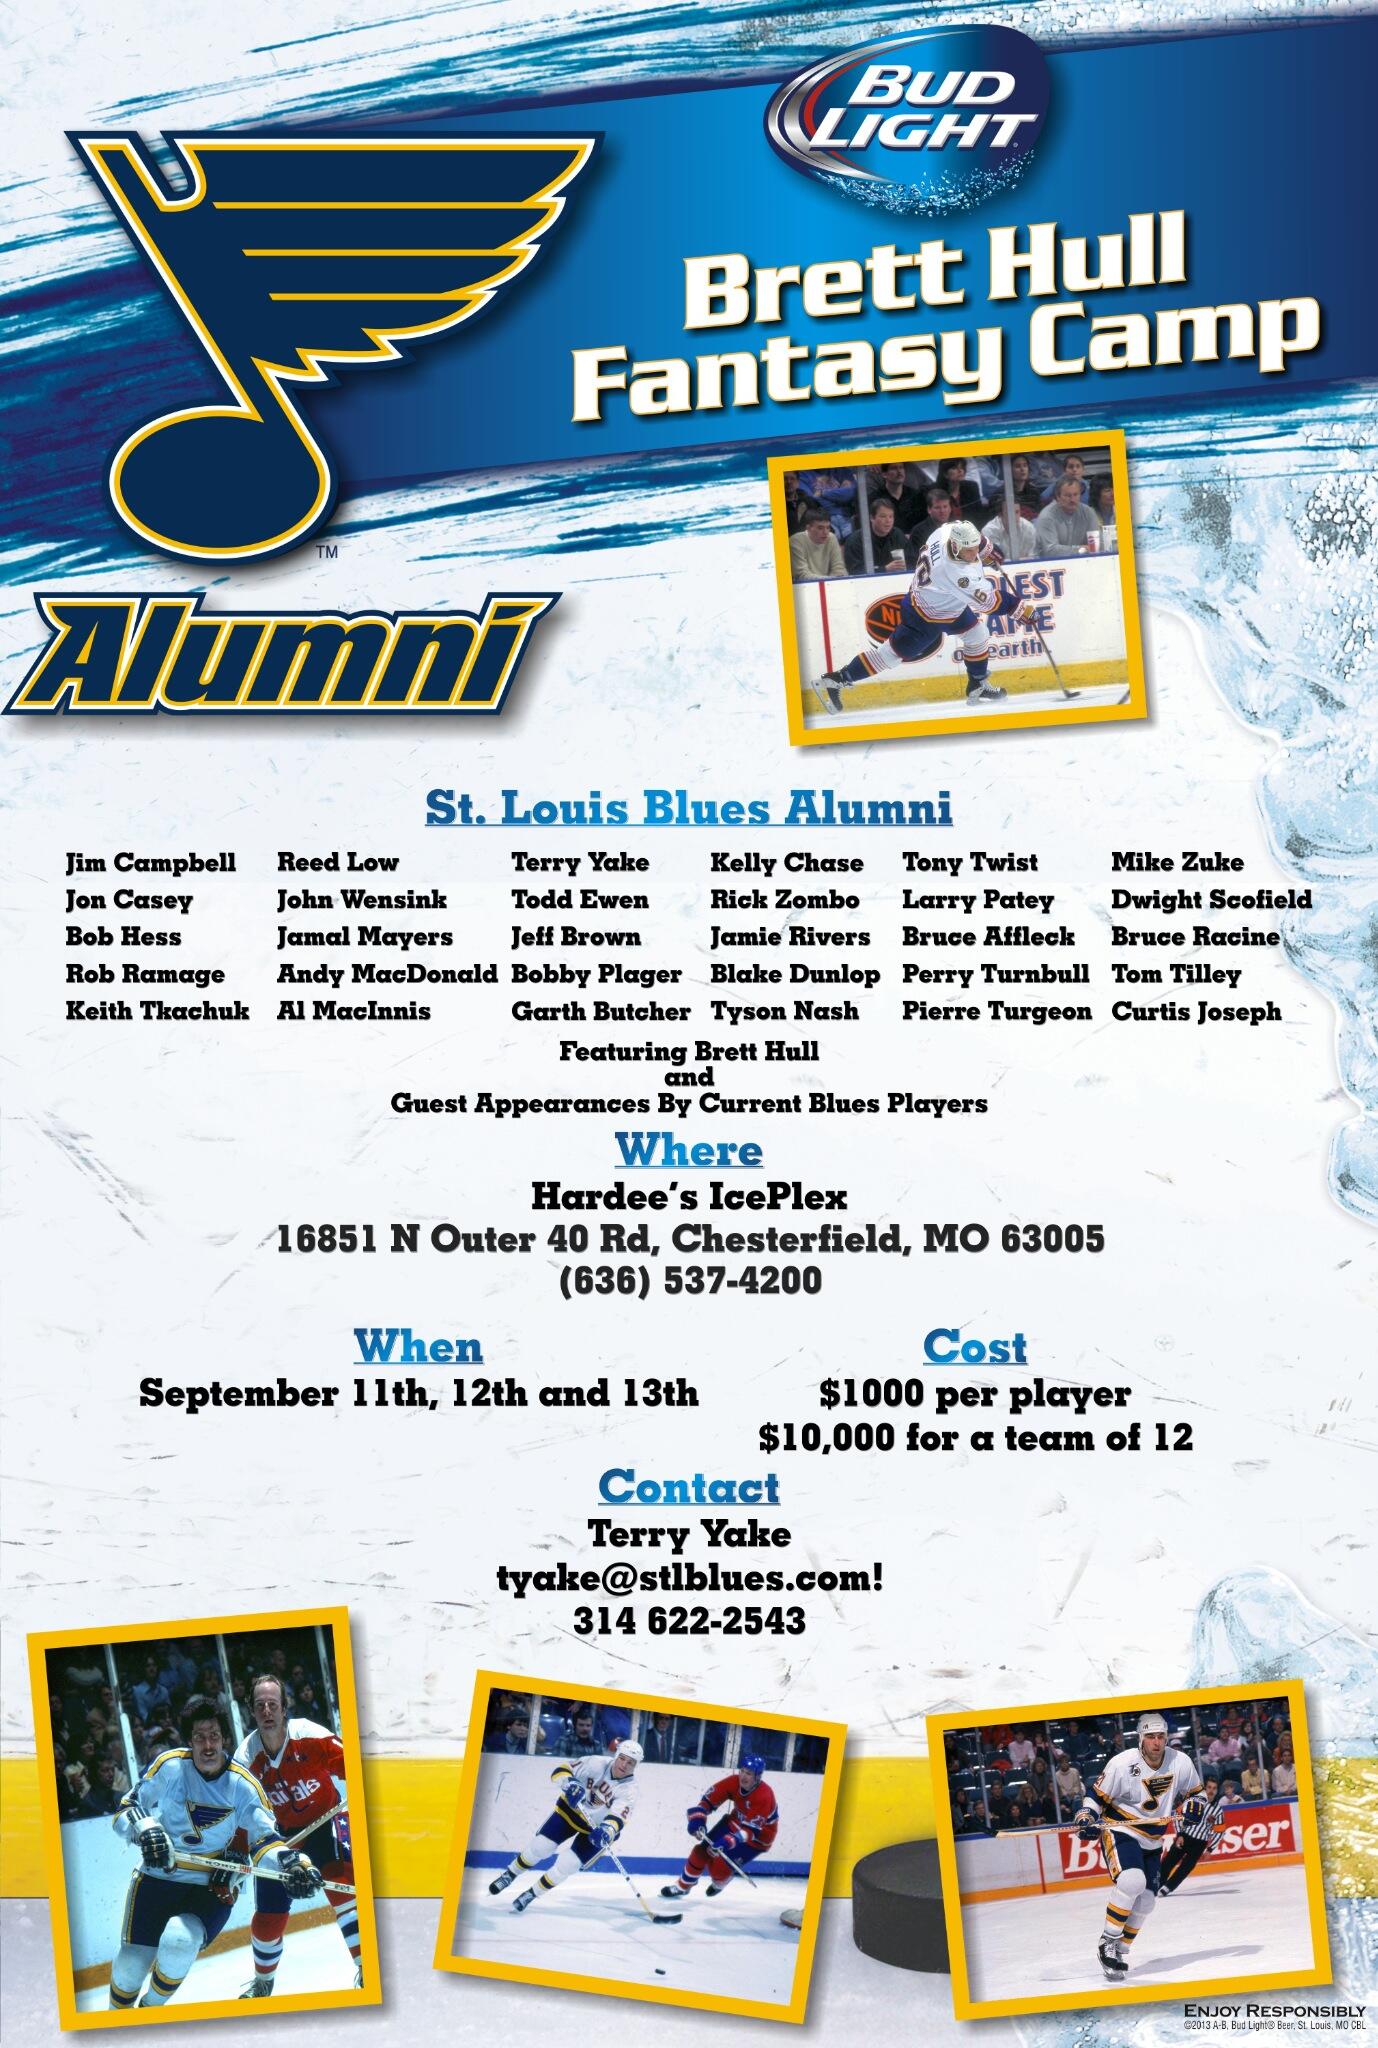 St. Louis Blues Alumni Association > Alumni Info > Where Are They Now?